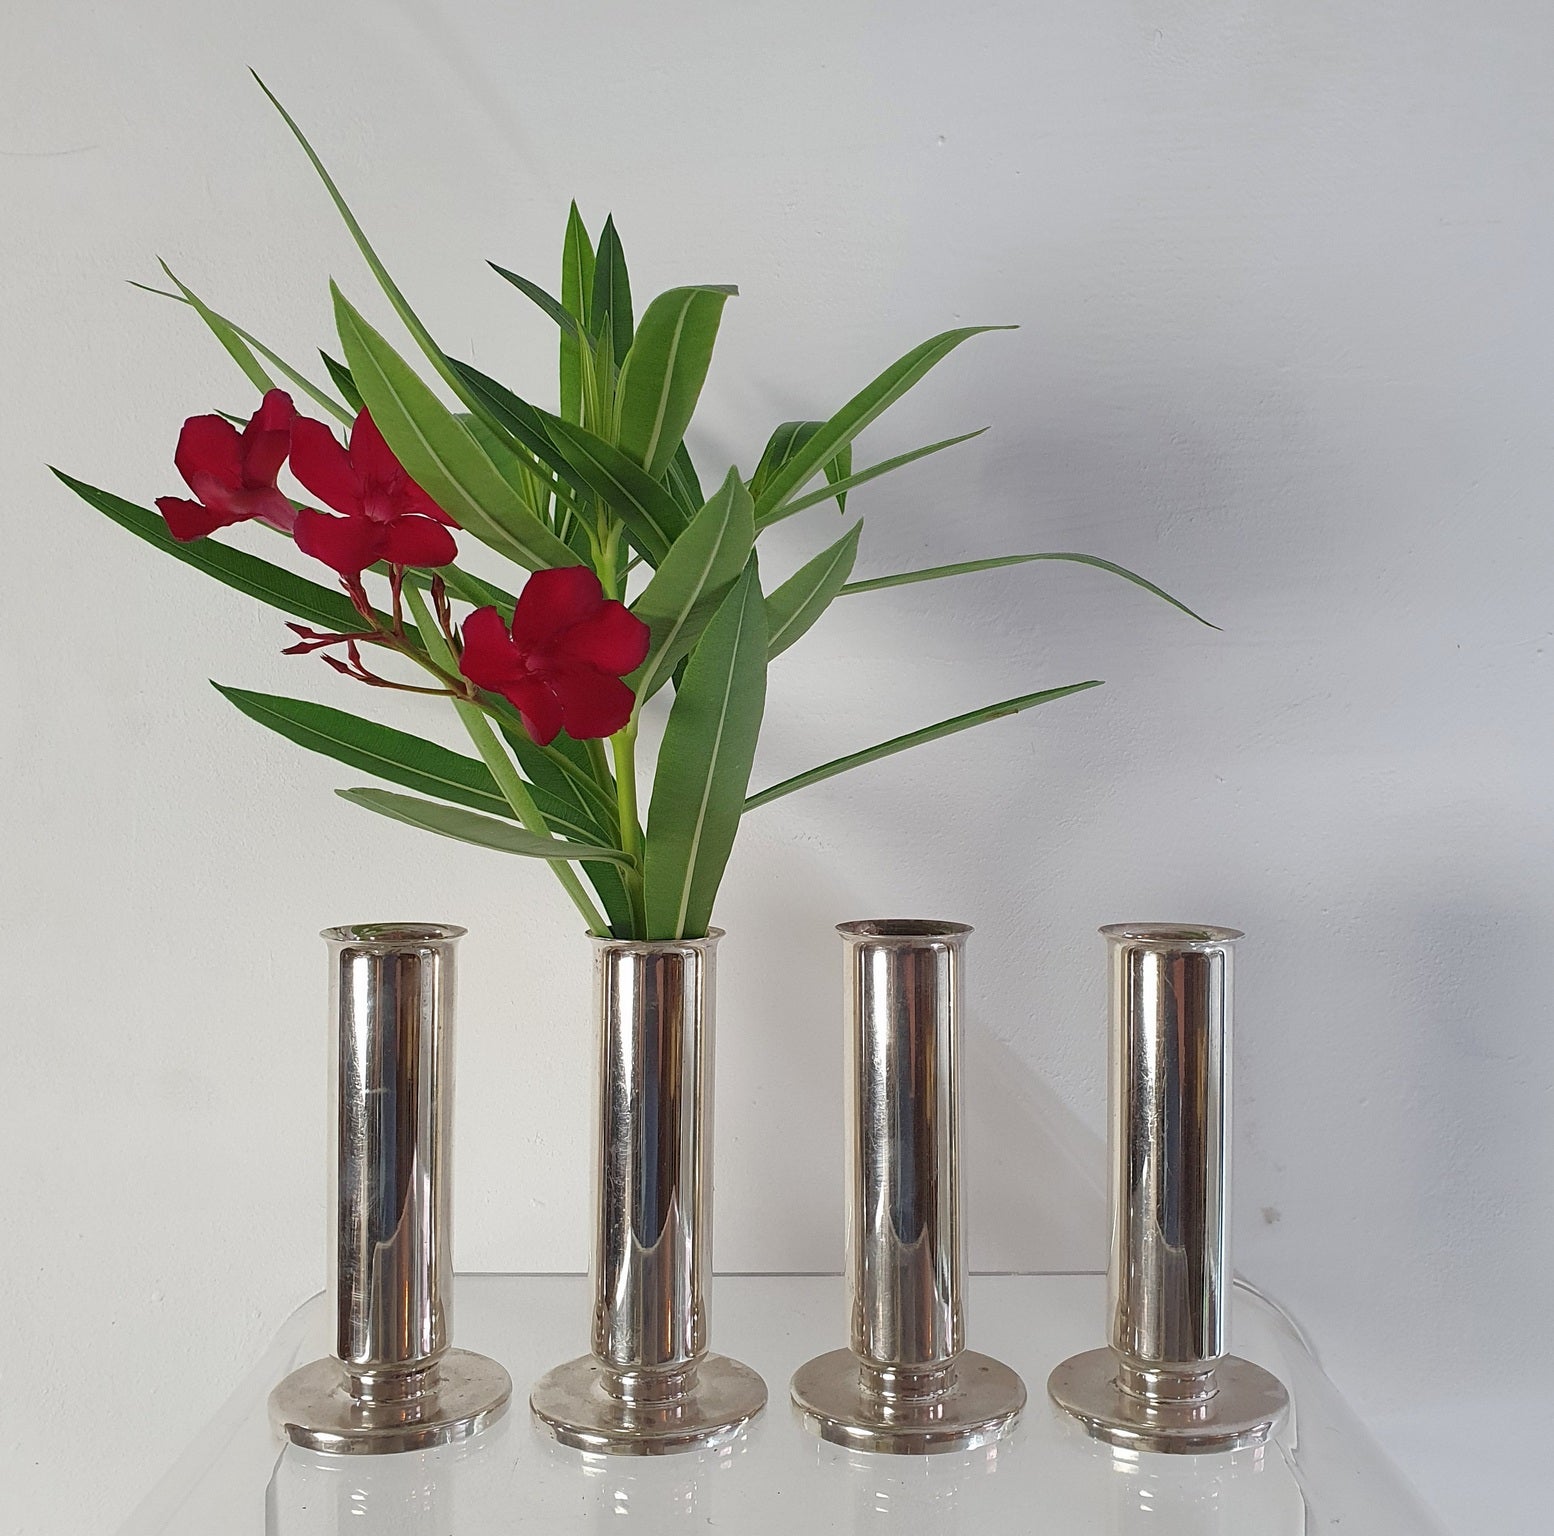 Soliflore Vases by Gio Ponti for Krupp Milano, 1930's For Sale